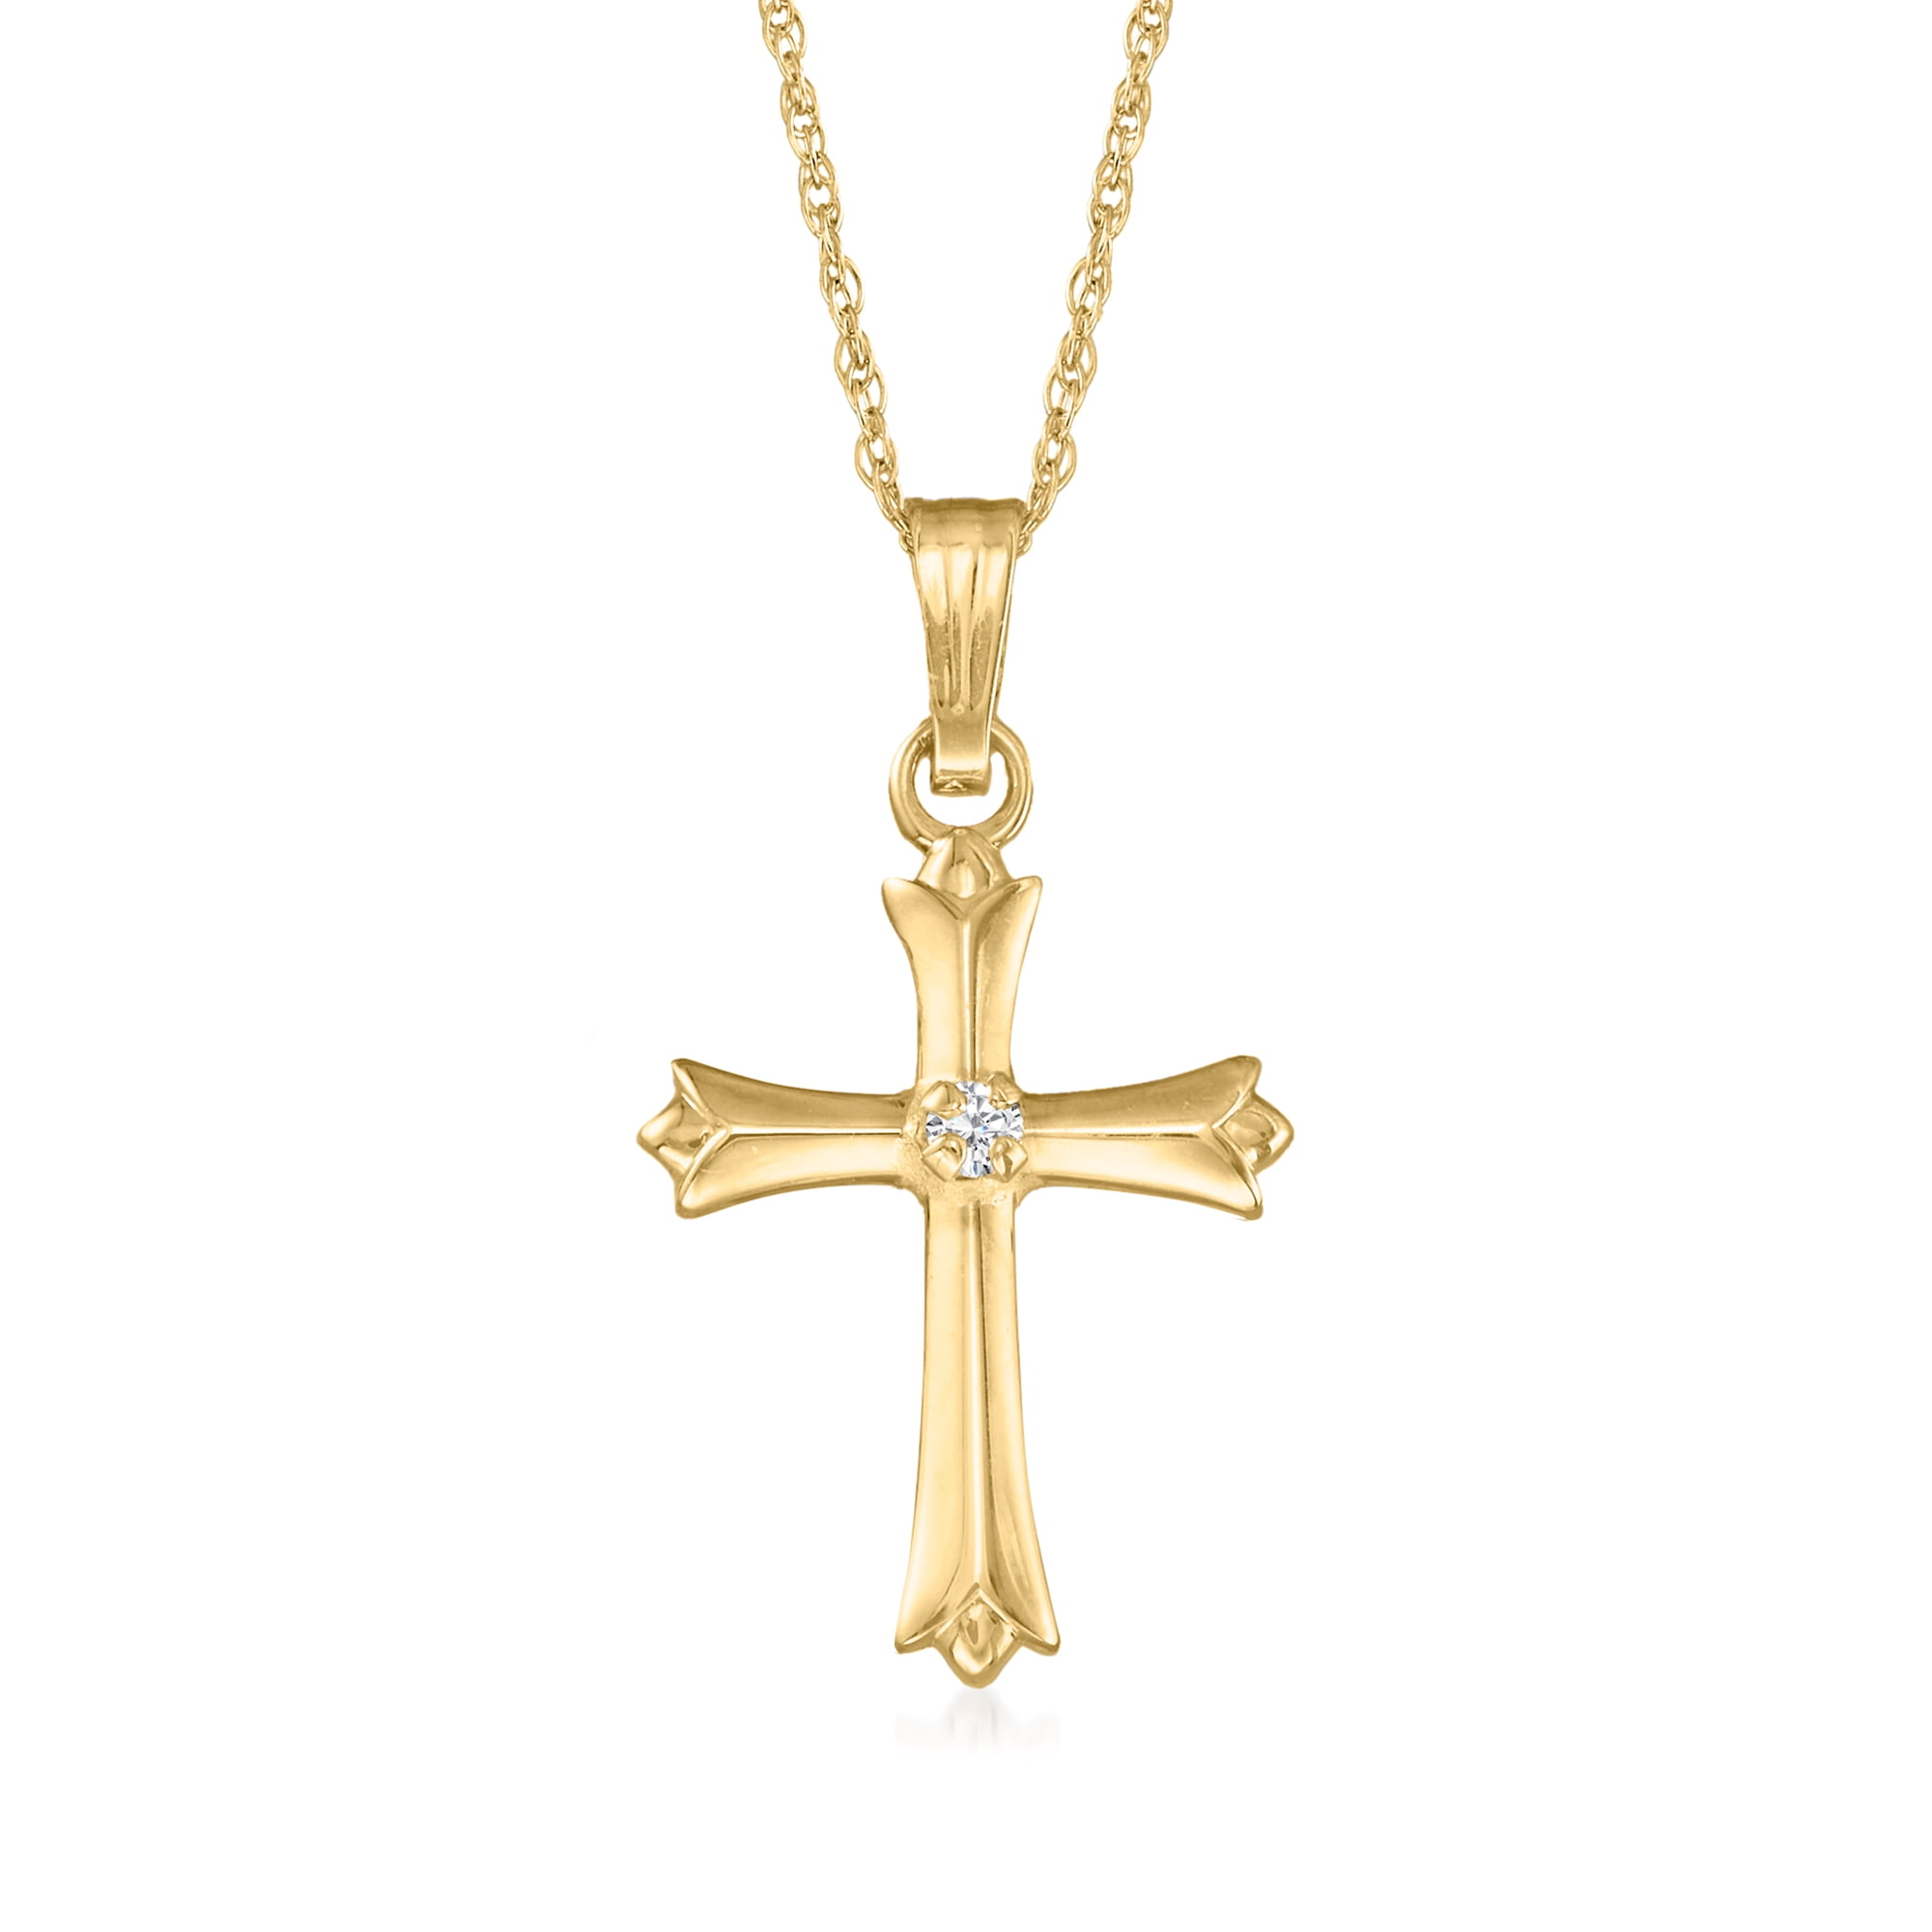 Childrens Cross Necklace in 14kt Yellow Gold – Day's Jewelers